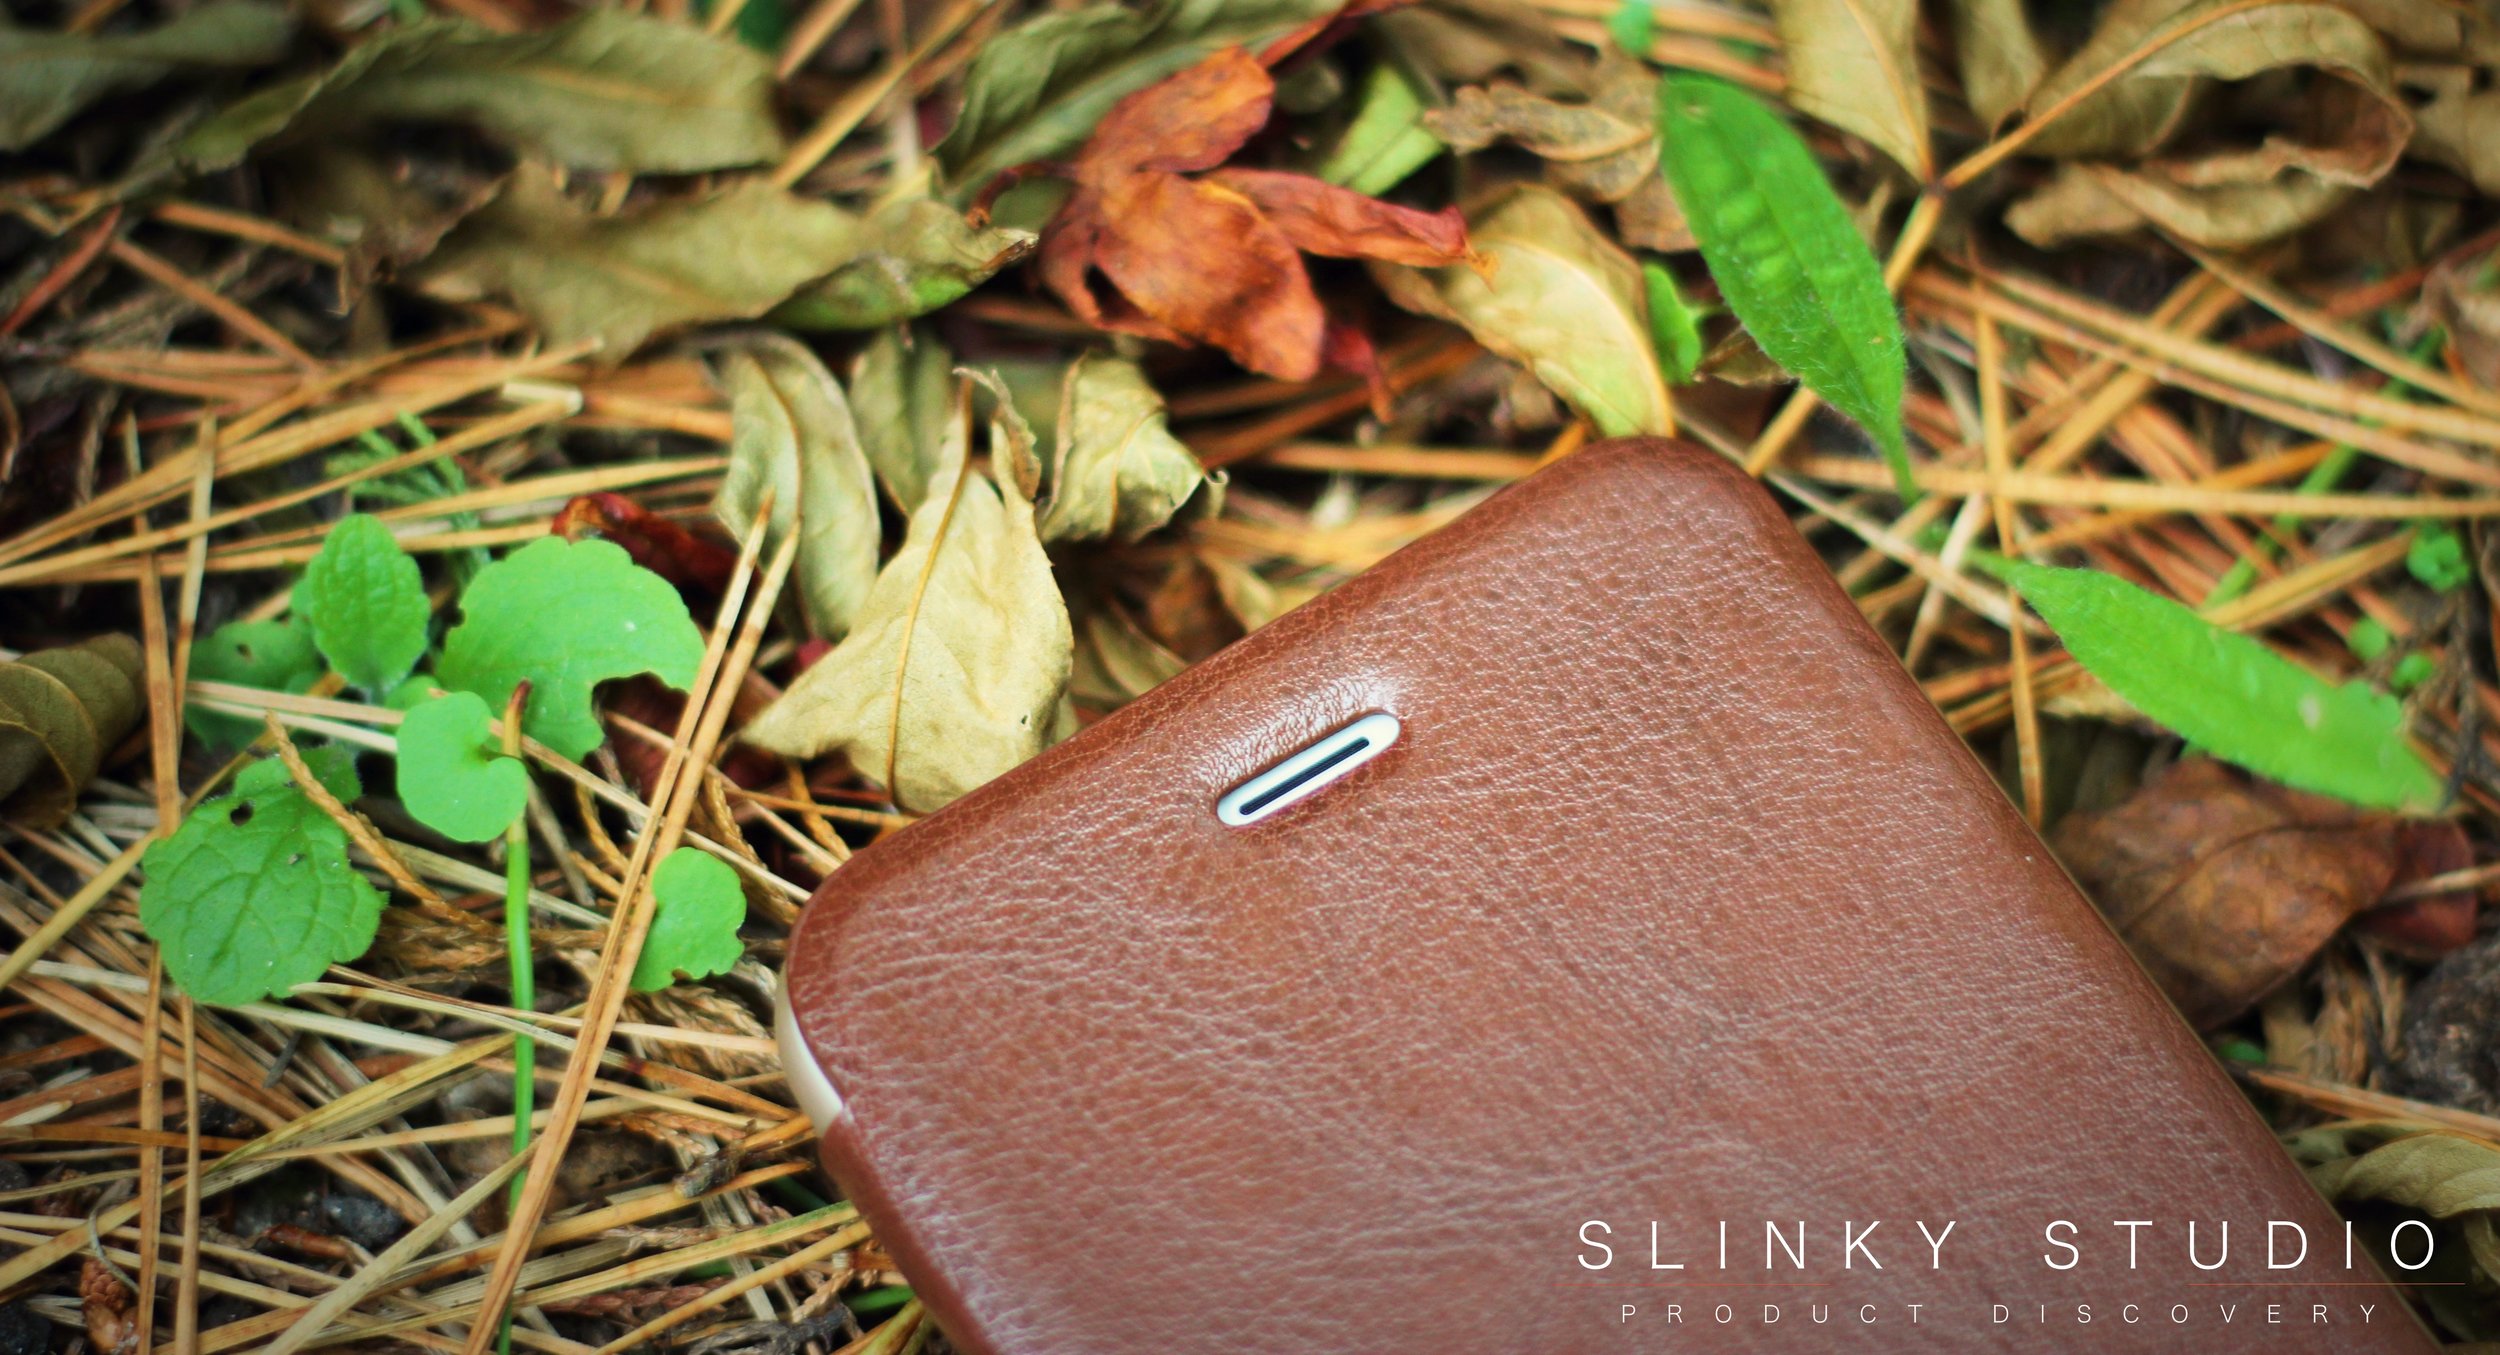 Elago Leather Flip Case for iPhone 6:6s Plus Front Speaker Cut Out Lying on Pile of Leafs.jpg